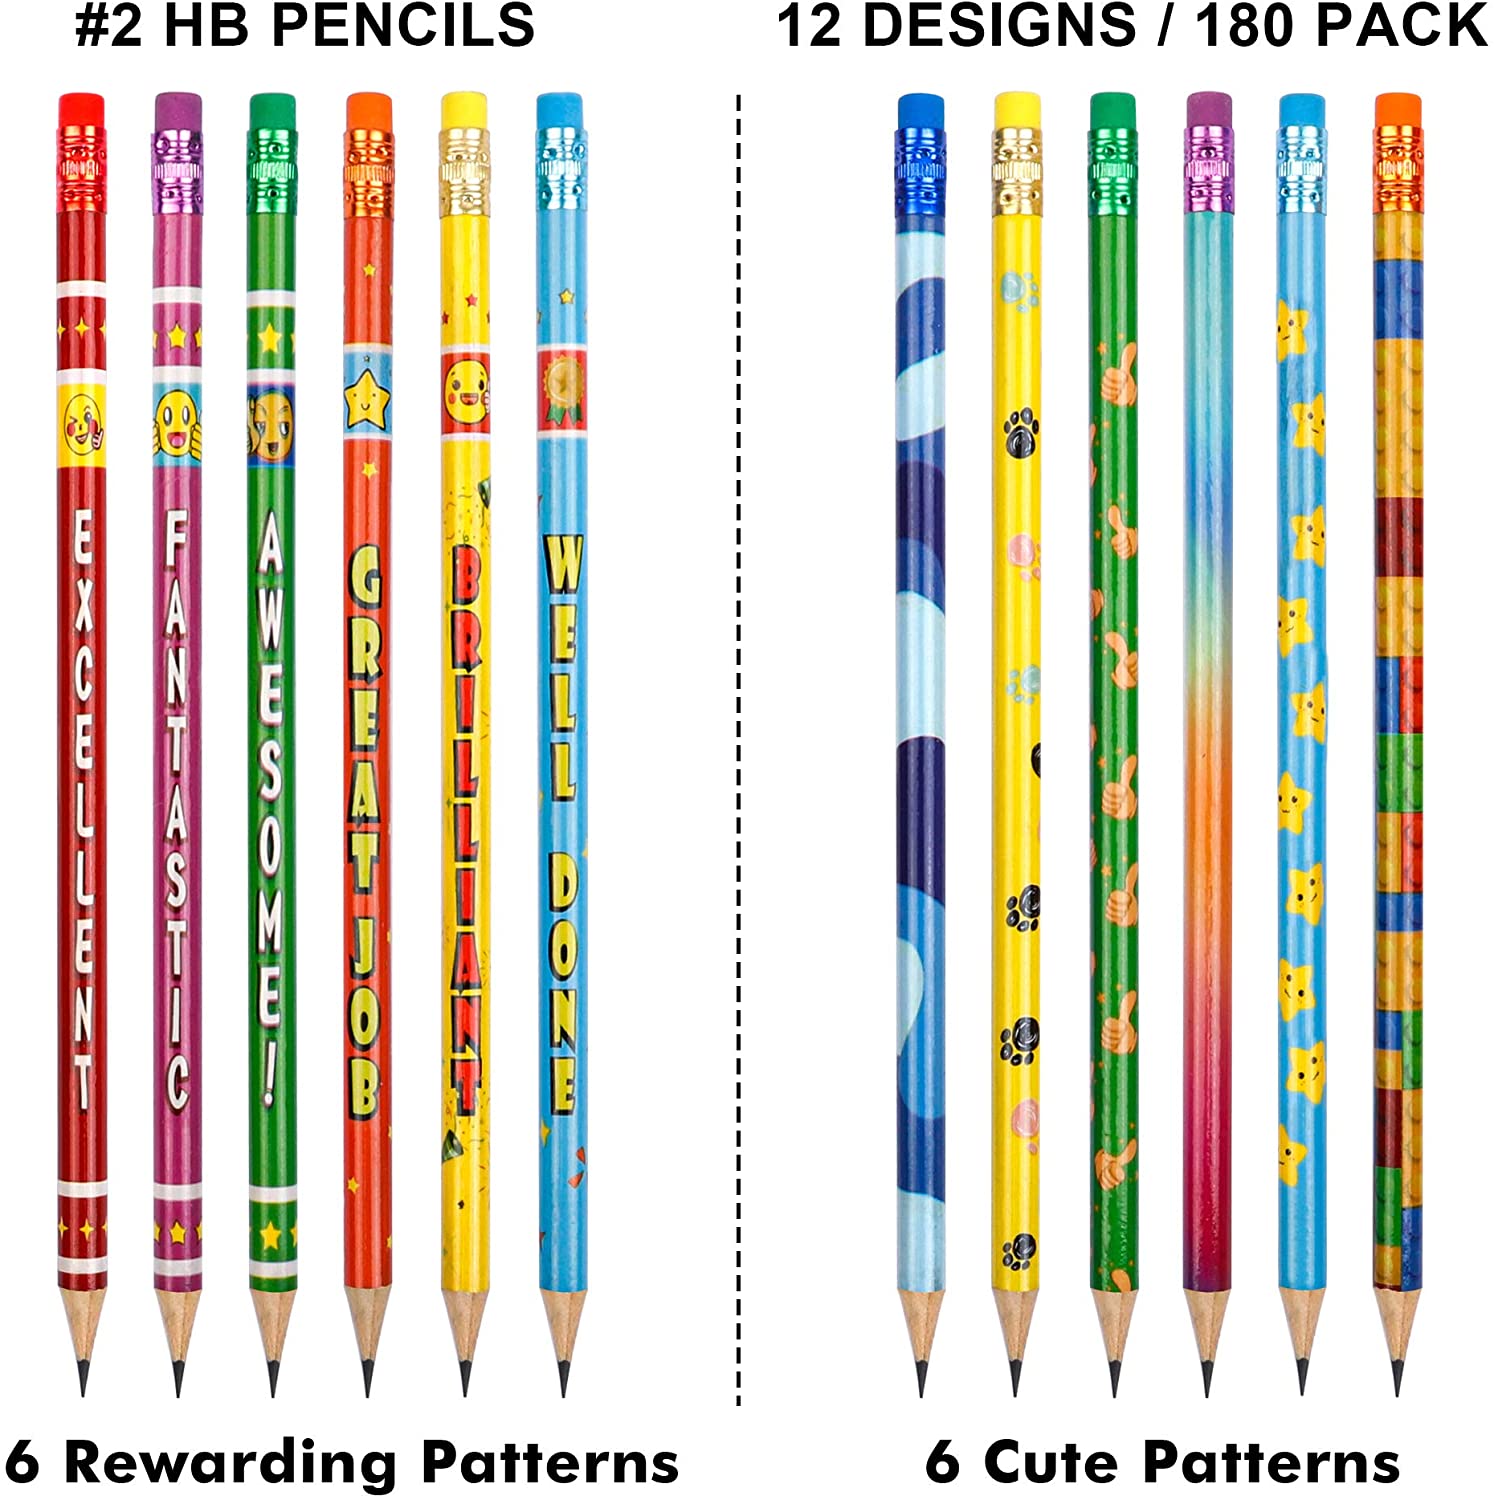 Assorted Colorful Pencils, Shuttle Art 180 Pack Kids Pencils Bulk with 12  Designs, 2 HB, Pre-Sharpened Awards and Incentive Pencils for Kids School  Home 